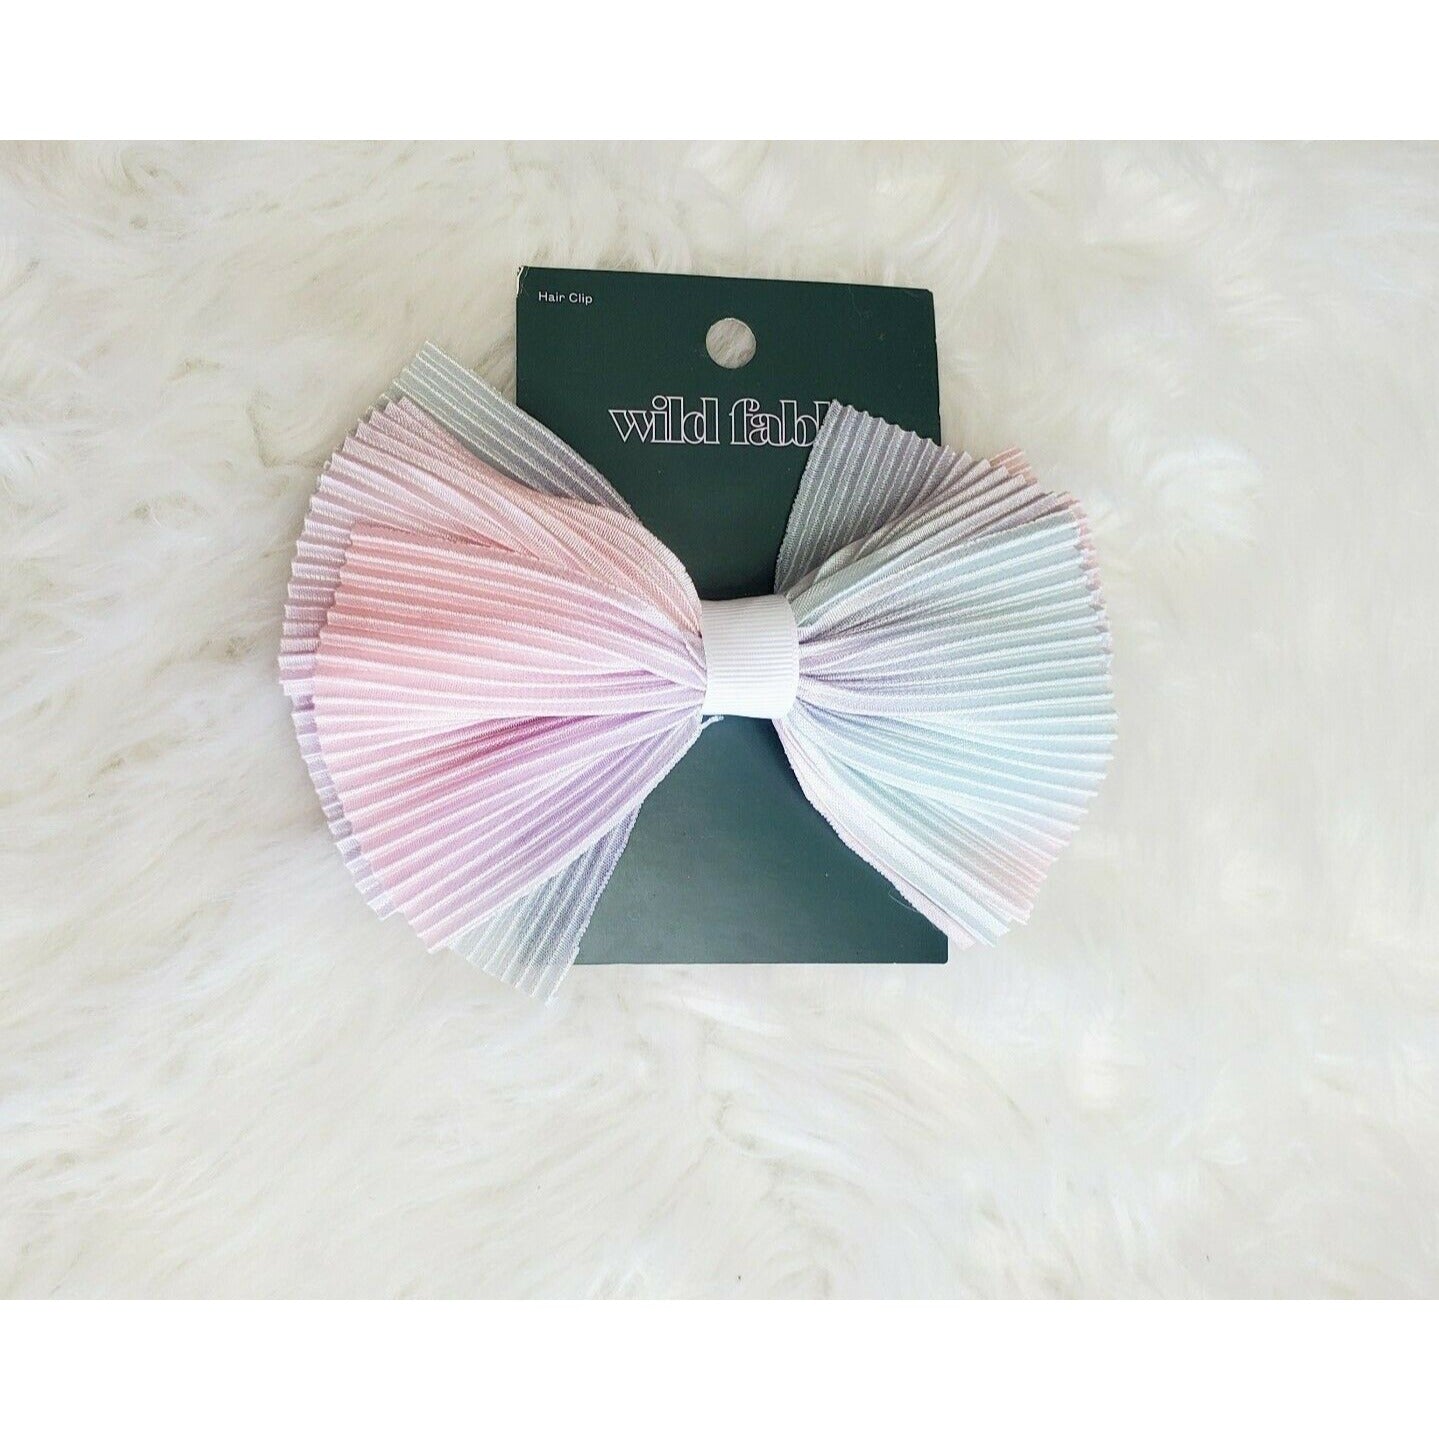 Wild Fable Girl's Tie-Dye Hair Bow Barette Clip, Pink Purple Blue Ombre  - NWT